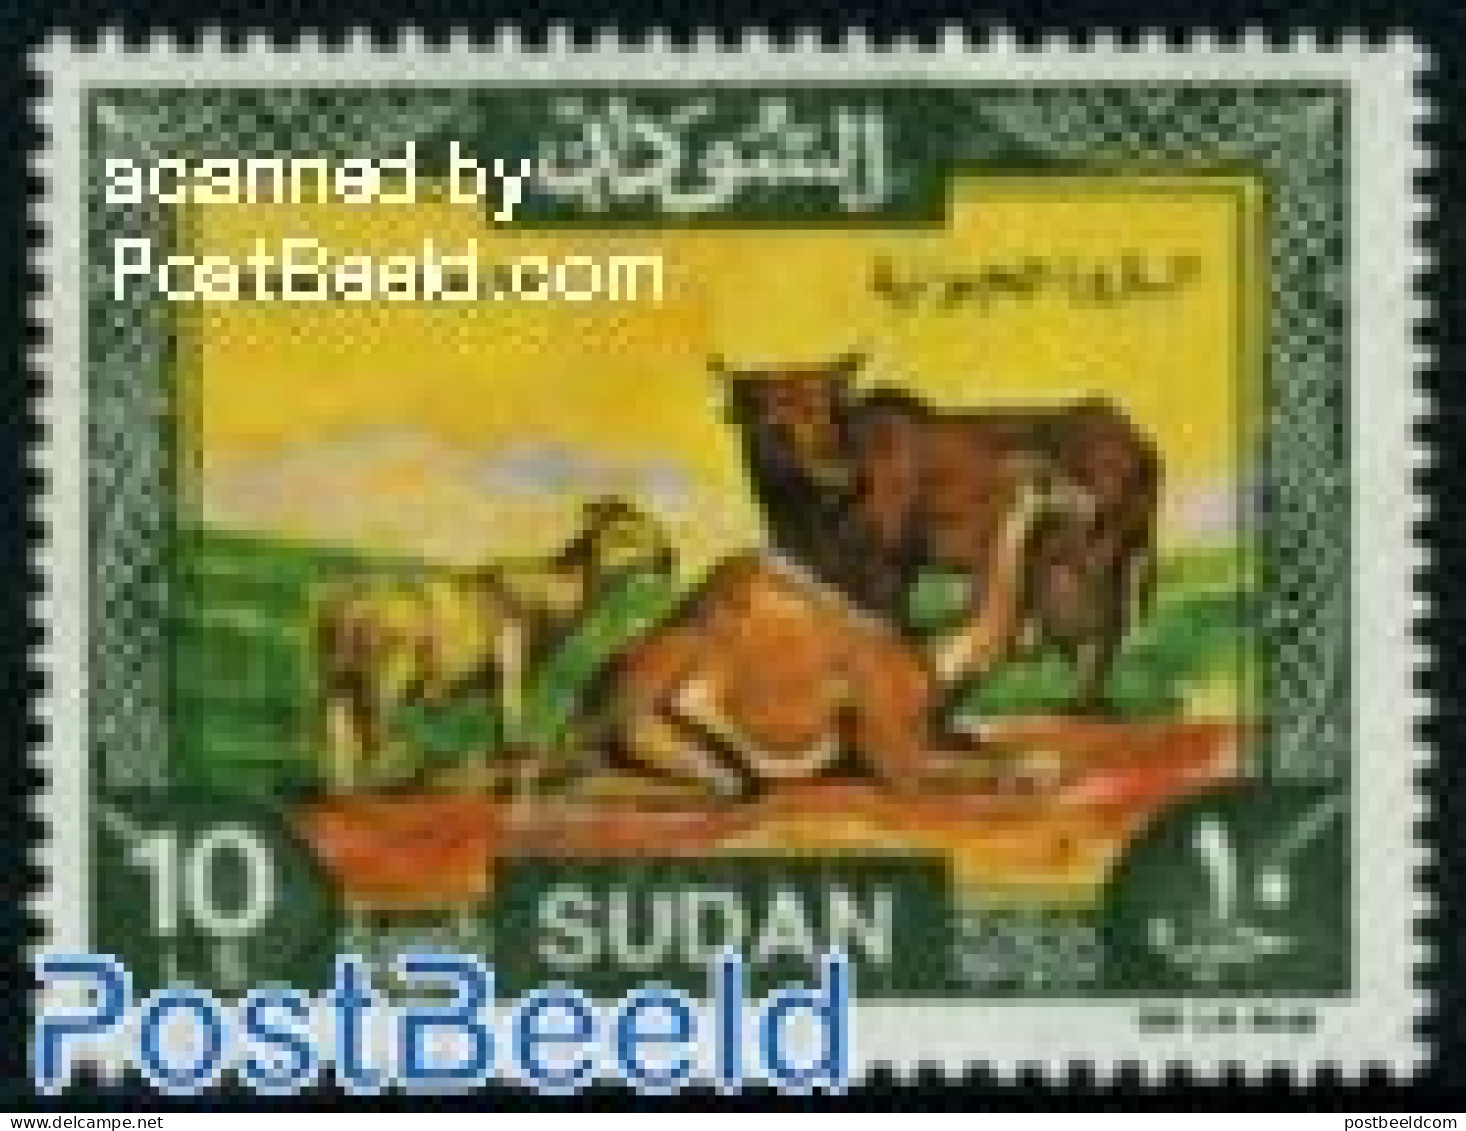 Sudan 1991 Stamp Out Of Set, Mint NH, Nature - Animals (others & Mixed) - Camels - Cattle - Sudan (1954-...)